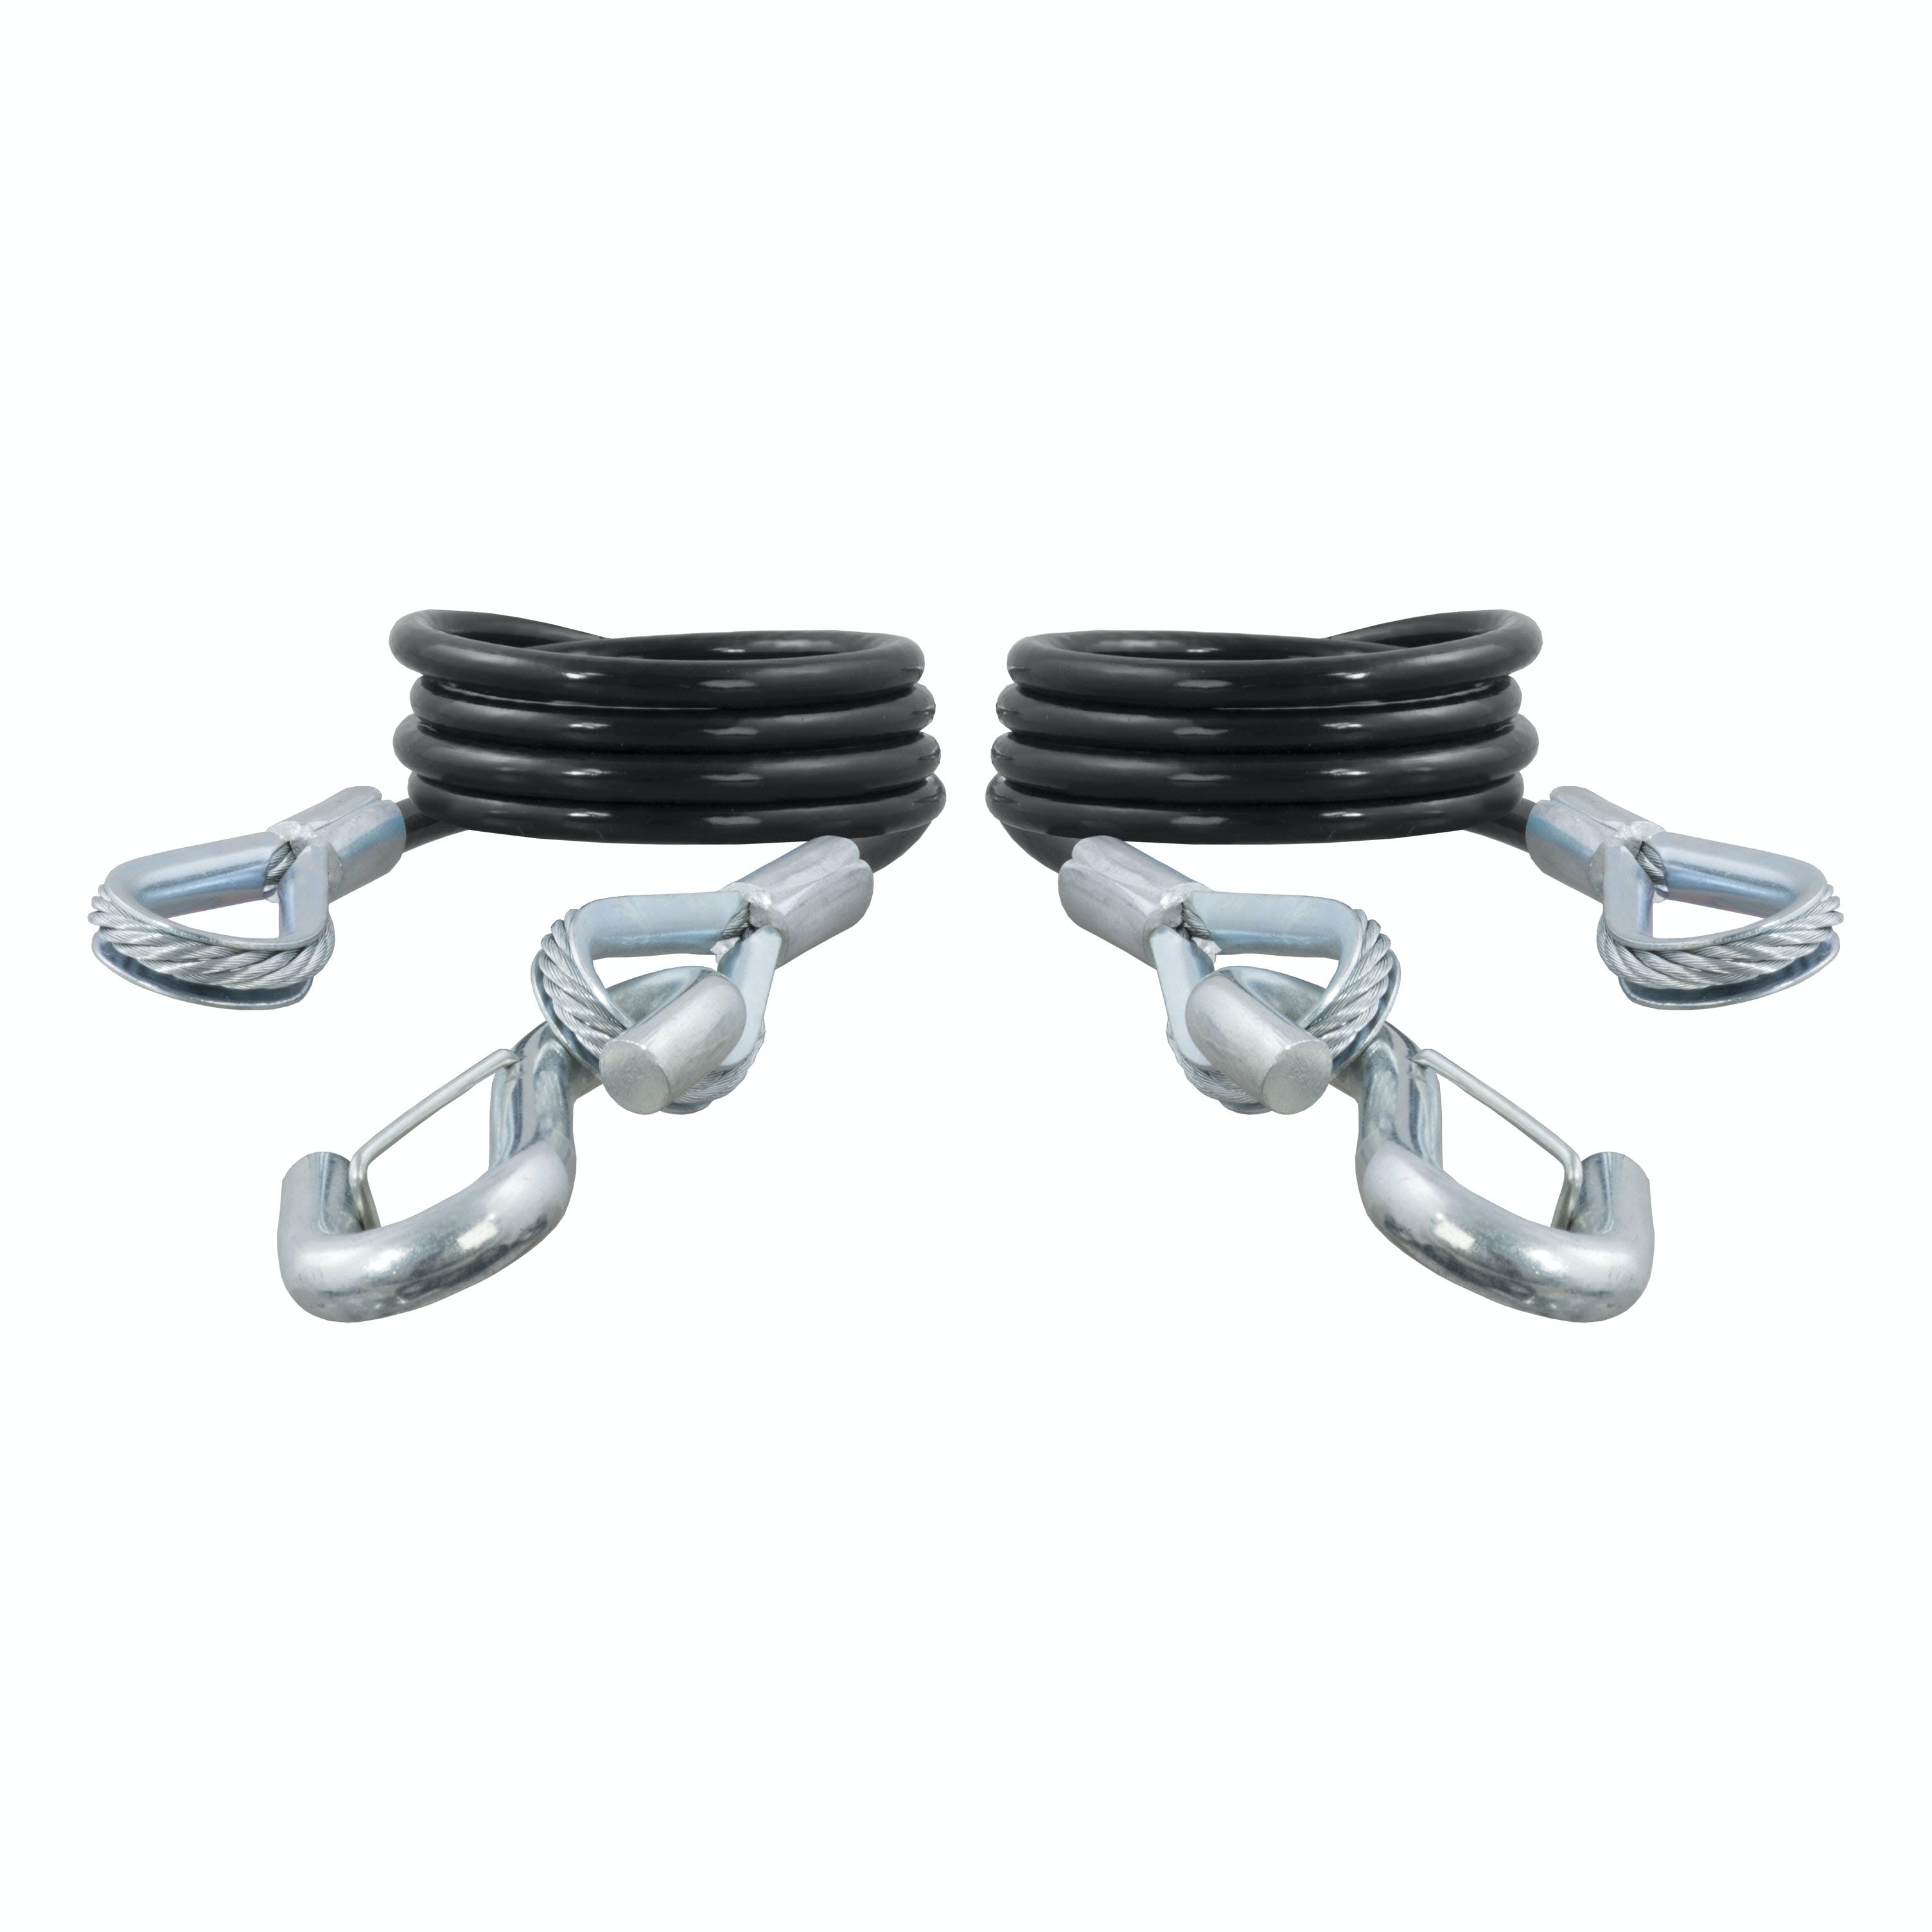 CURT 80136 43-7/8 Safety Cables with 2 Snap Hooks (3,500 lbs, Vinyl-Coated, 2-Pack)